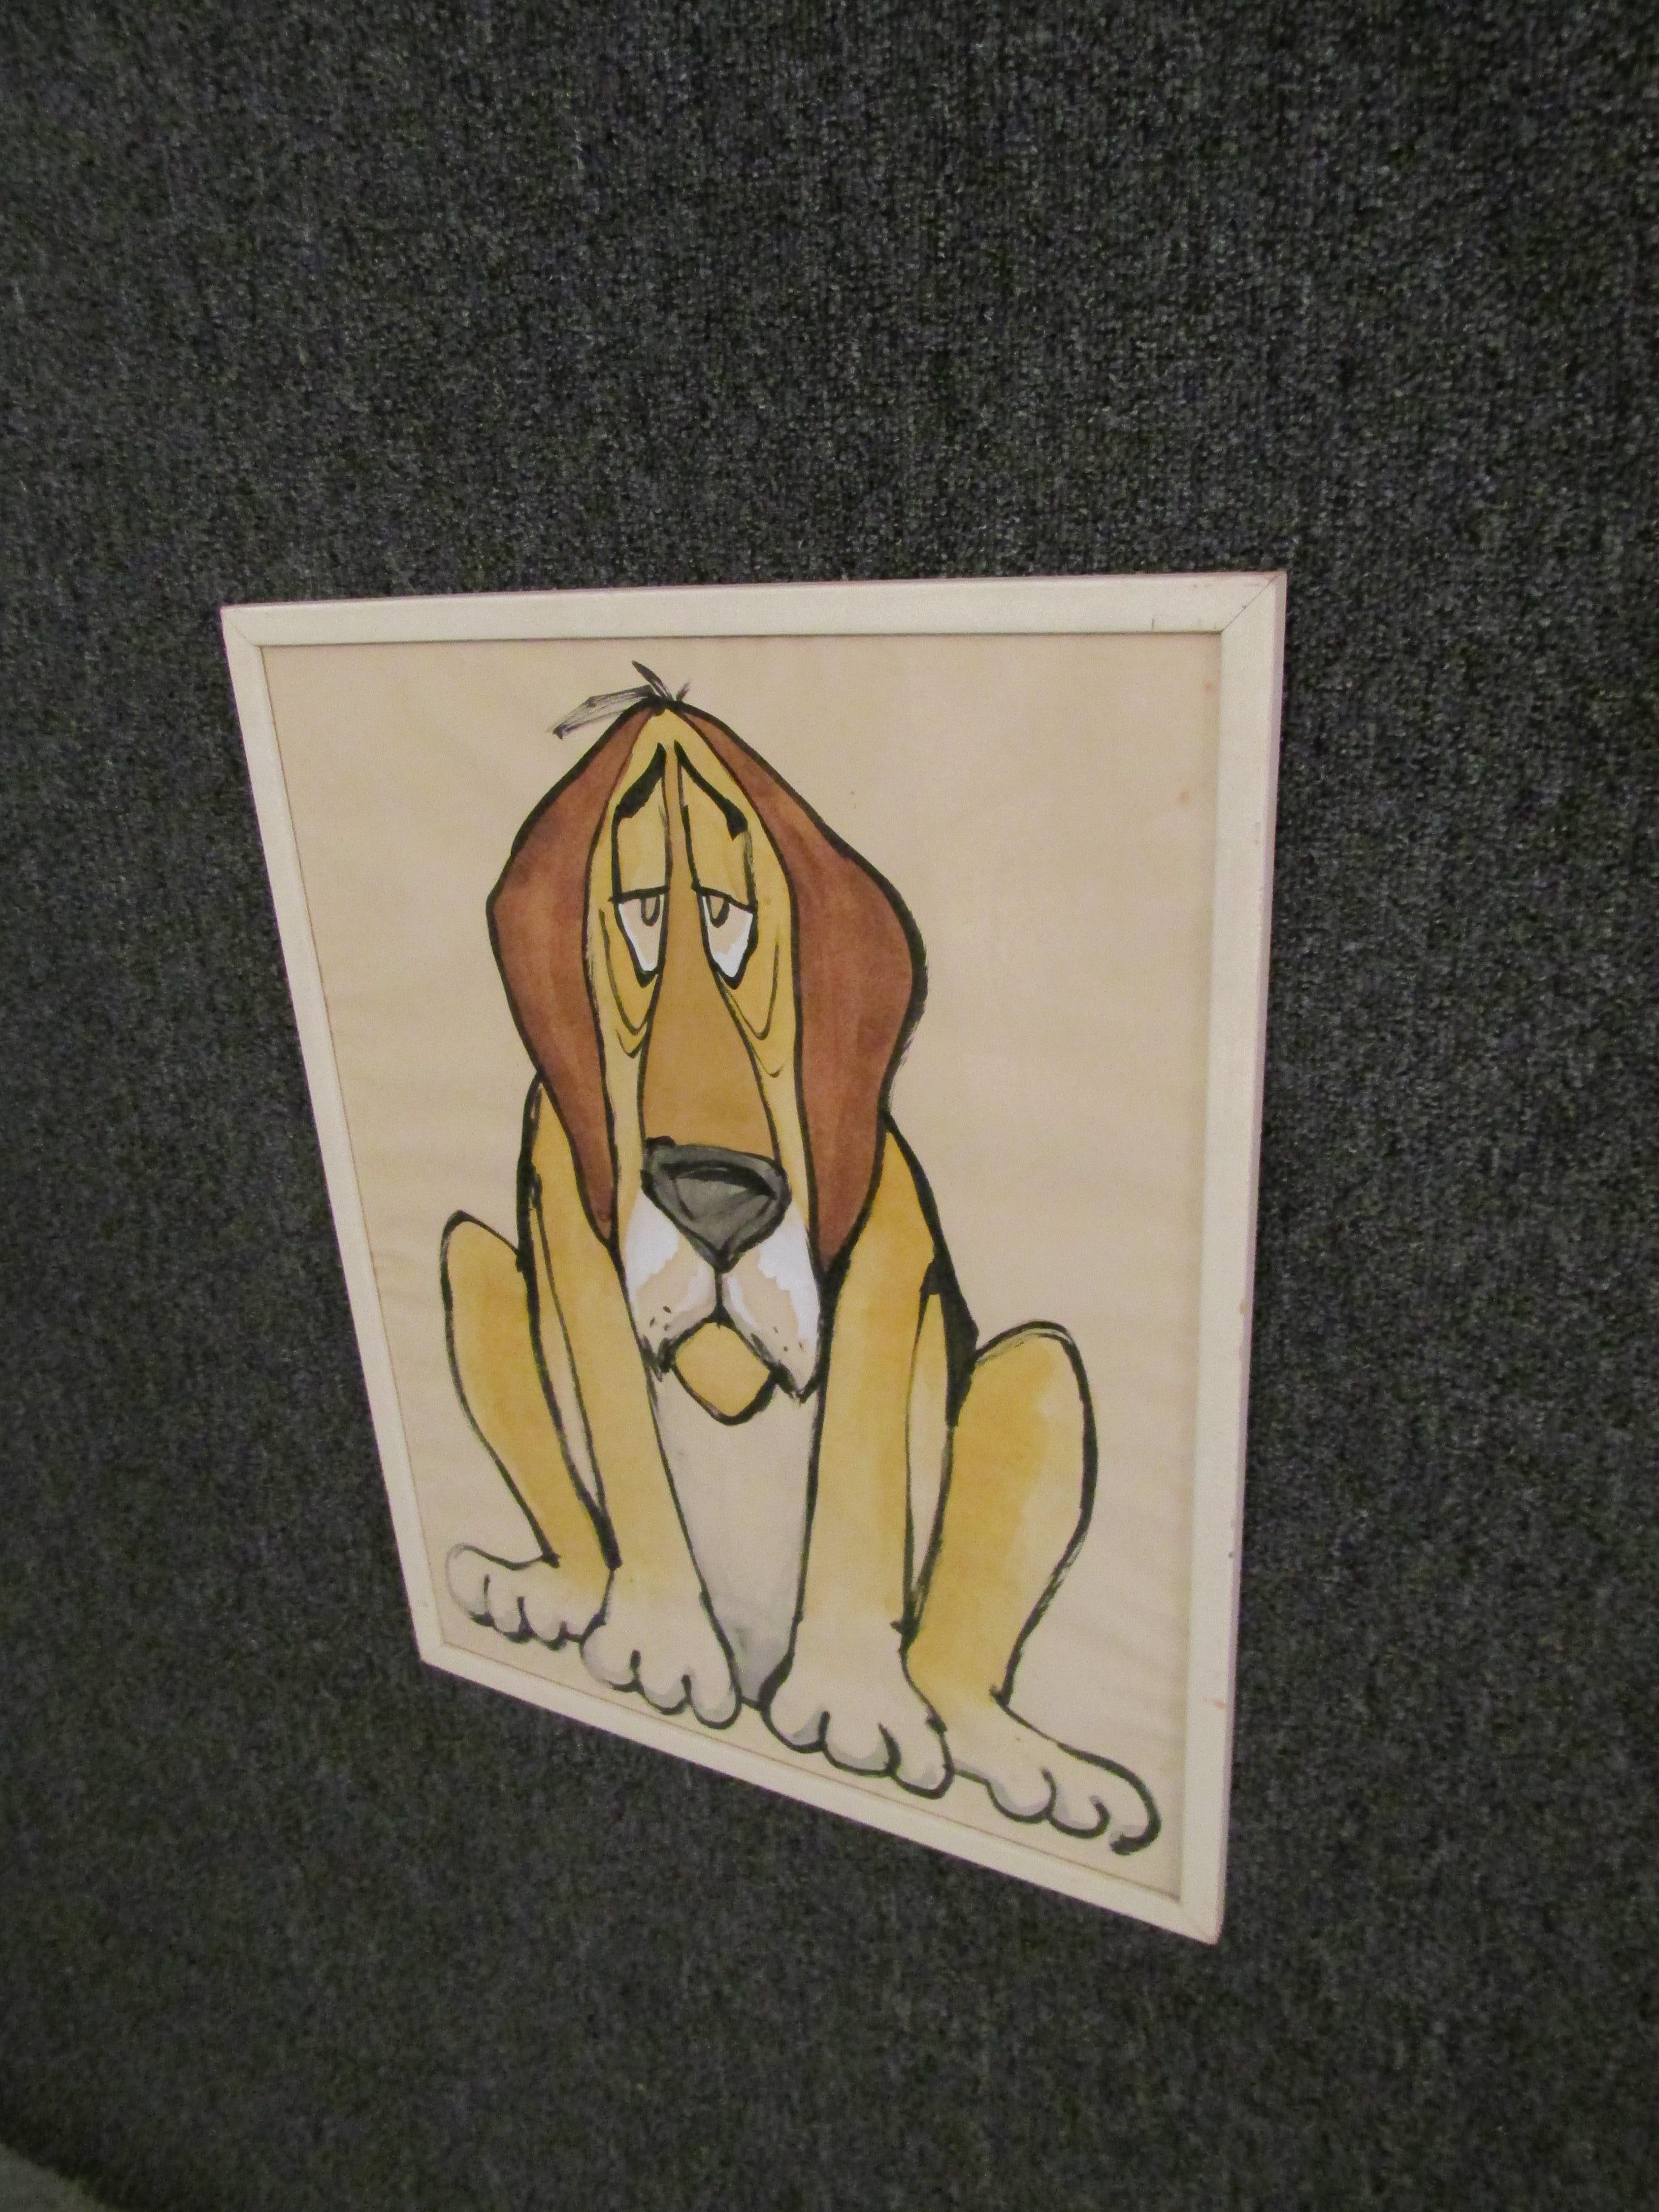 Add a sense of fun and a pop of color to any room with this wonderful vintage watercolor of a cartoon dog. This pup features a wonderful expression that is sure to be a conversation starter in any retro decor. Please confirm item pickup location